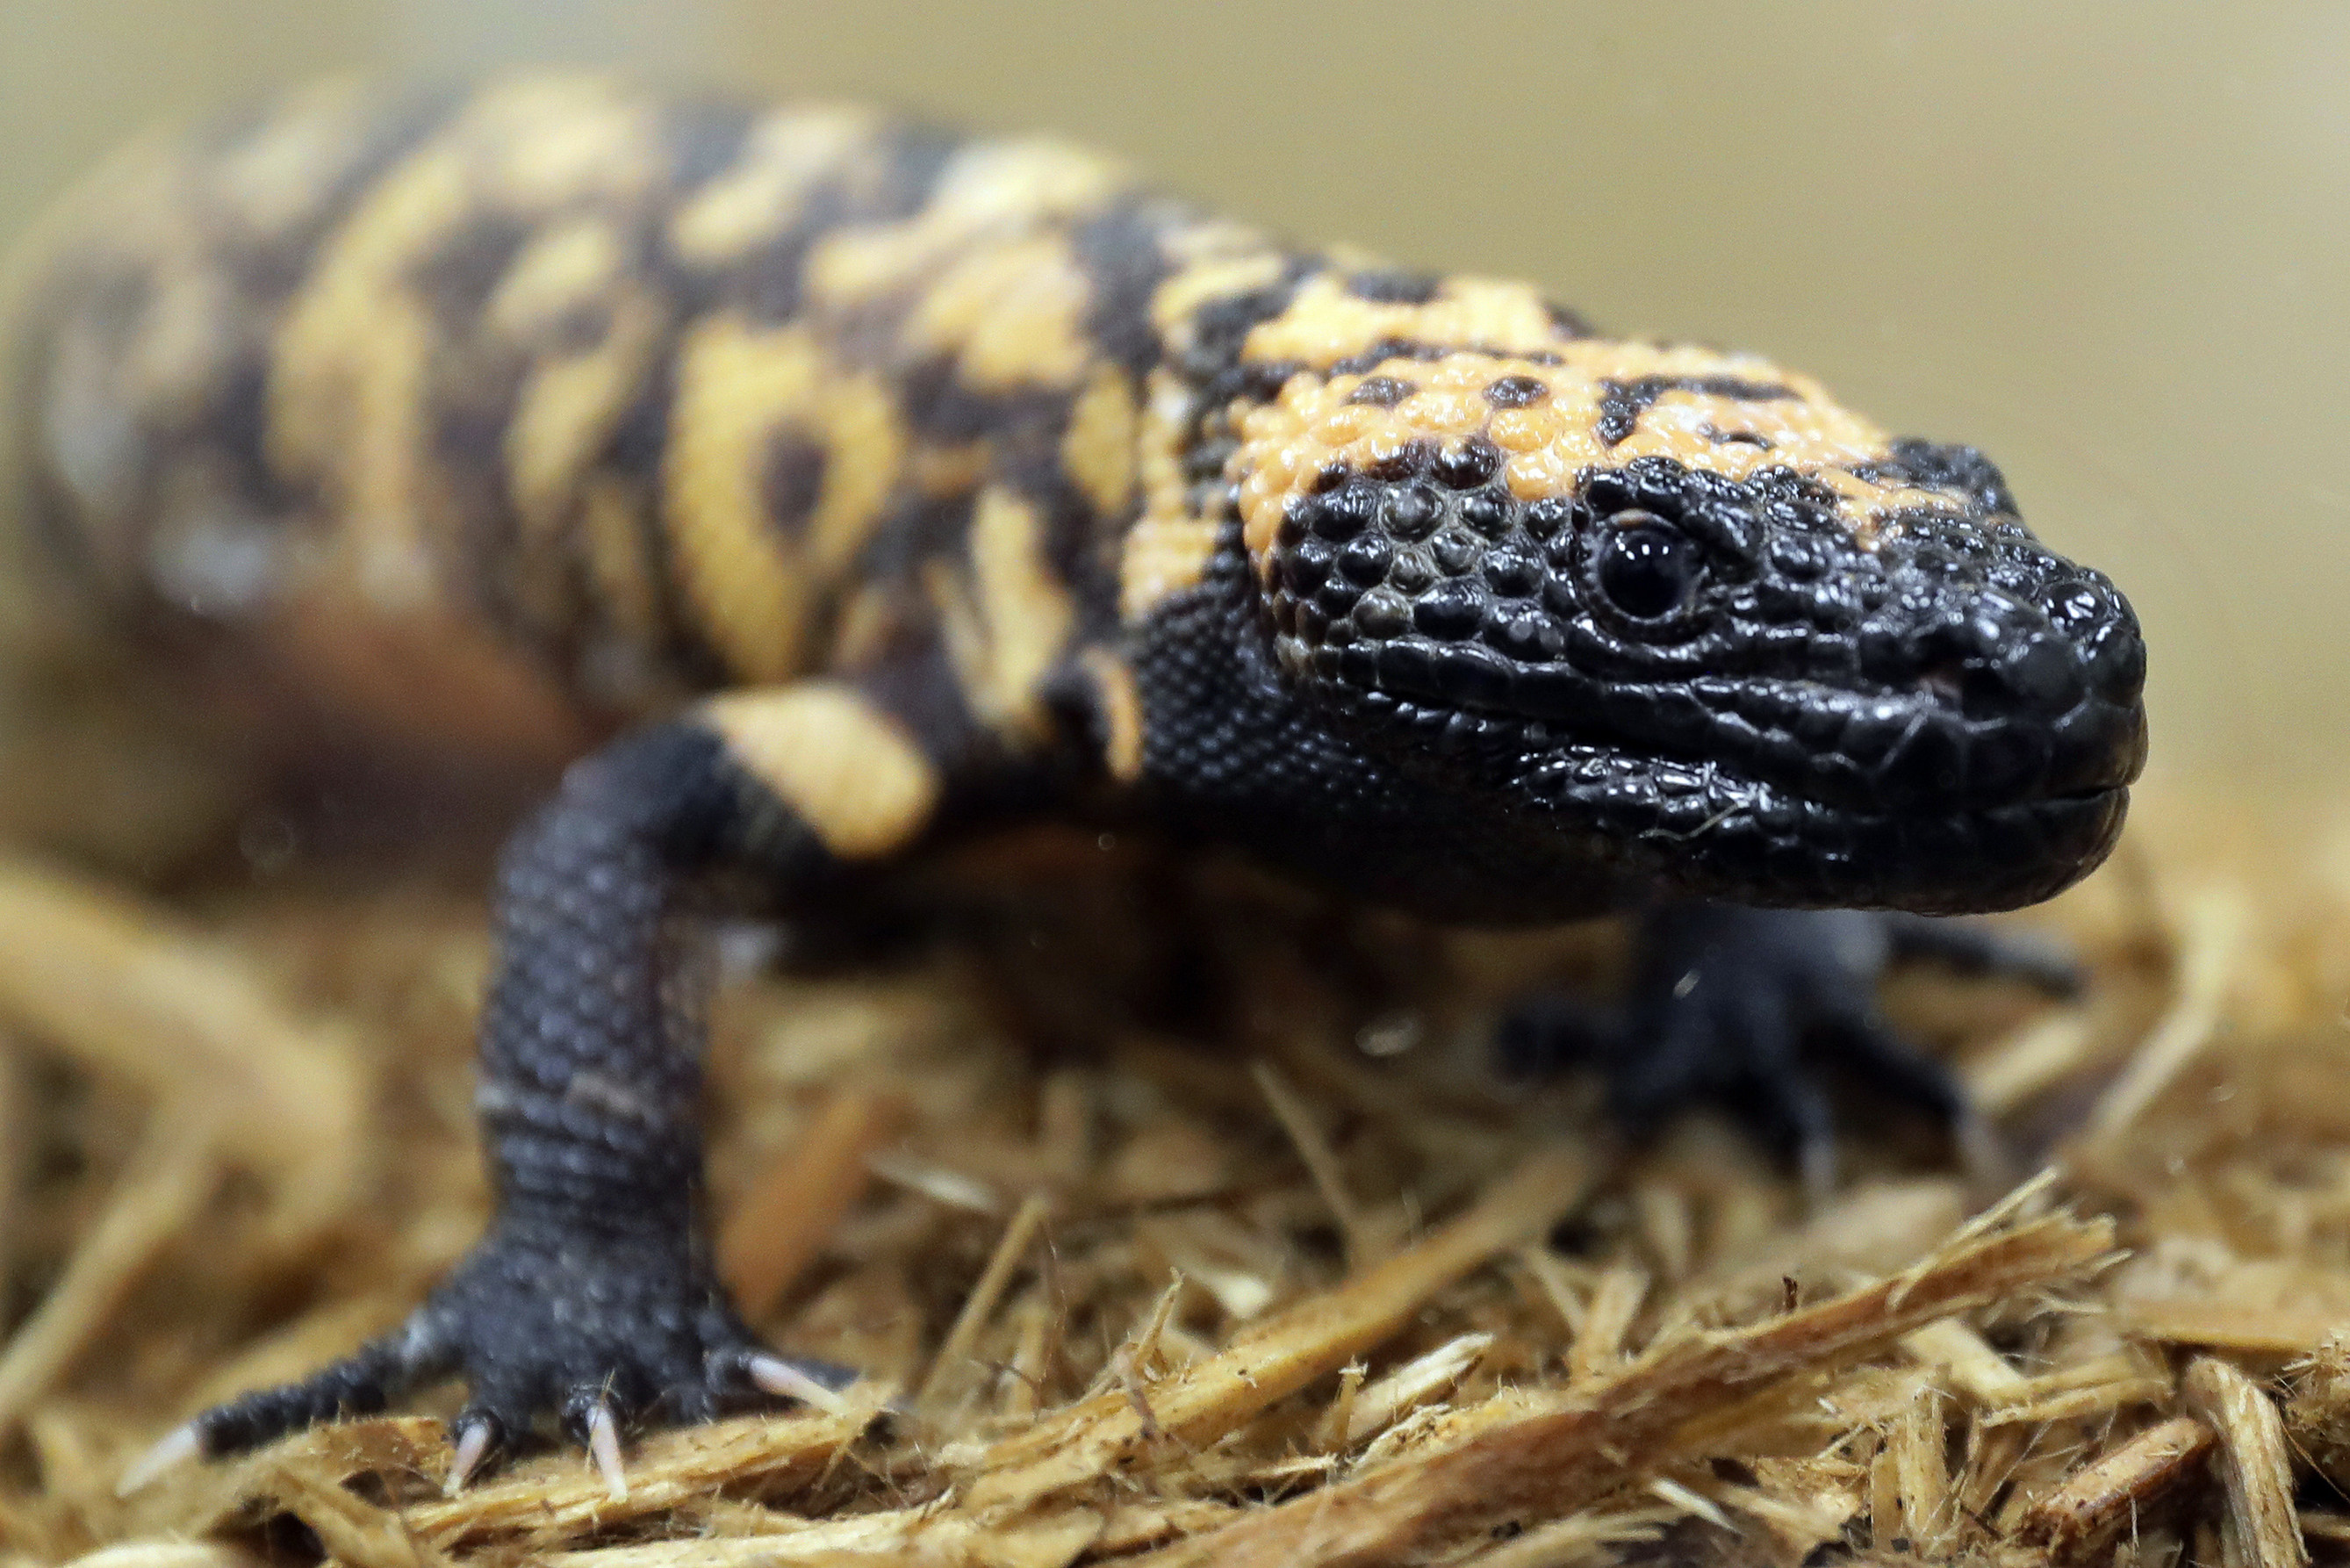 A 34-year-old man in the US state of Colorado died in February after being bitten by his pet Gila monster in a very rare occurrence. Gila monster bites are often painful but normally aren’t deadly, experts say. Photo: AP